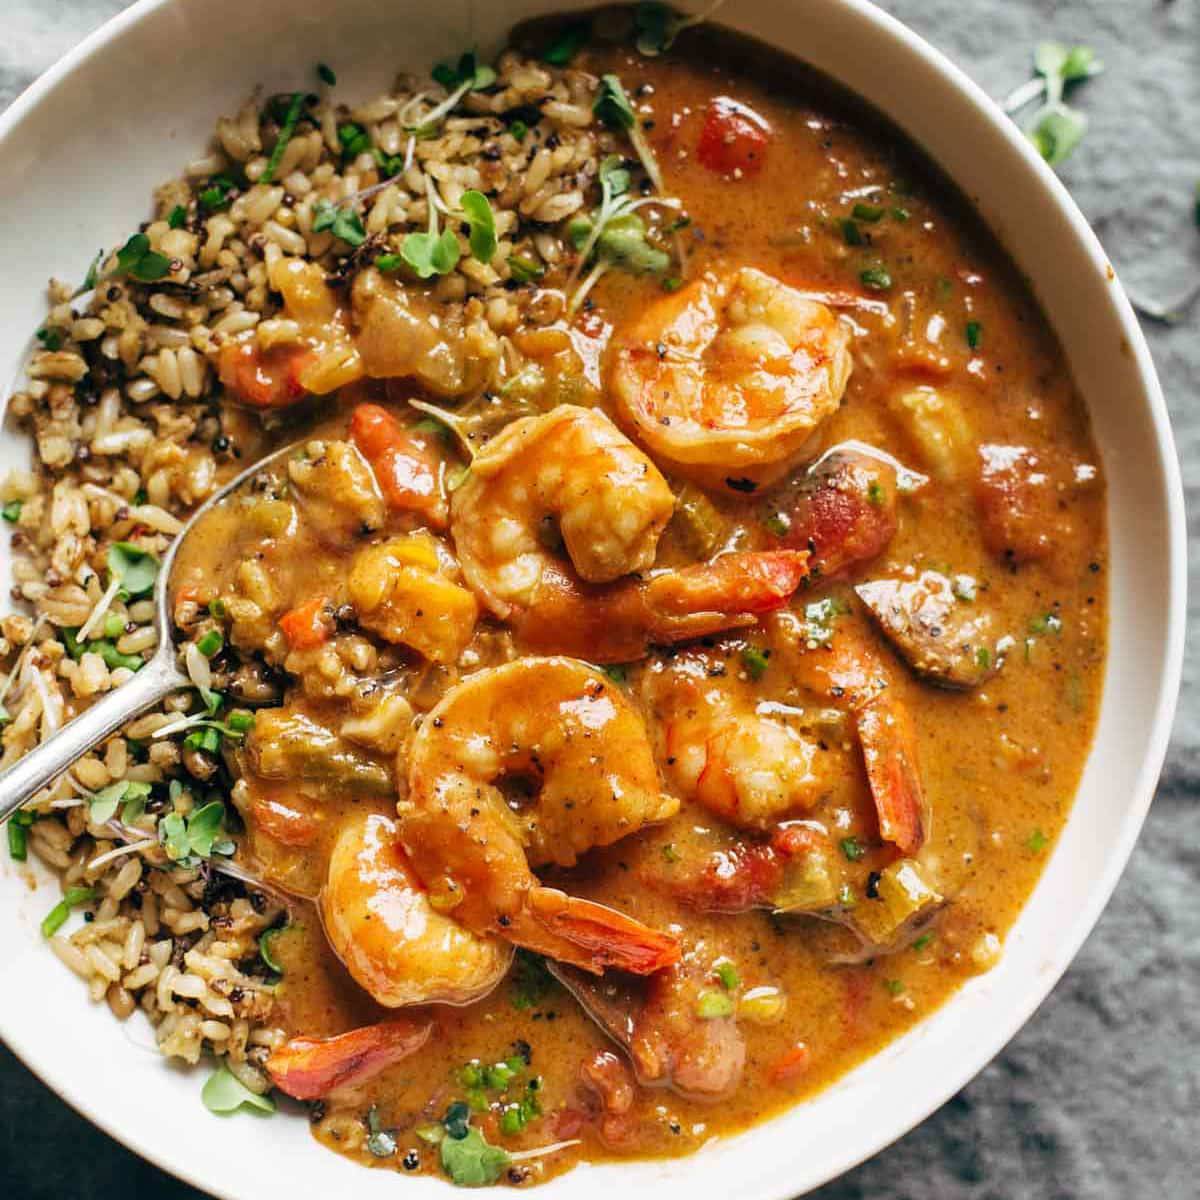 Spicy Weekend Gumbo With Shrimp And Sausage Recipe Pinch Of Yum,Pork Chops In The Oven Temp